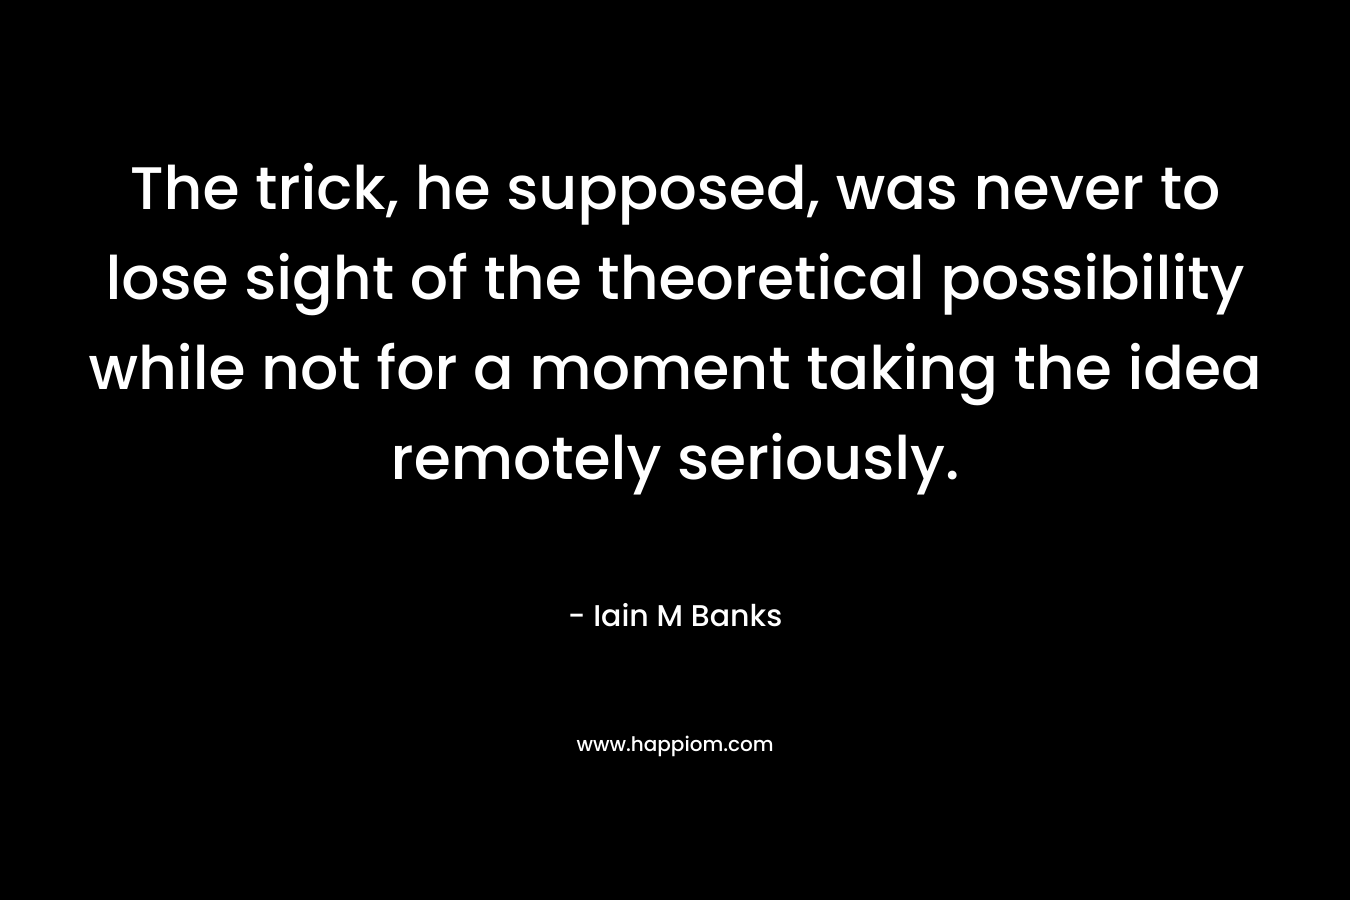 The trick, he supposed, was never to lose sight of the theoretical possibility while not for a moment taking the idea remotely seriously.